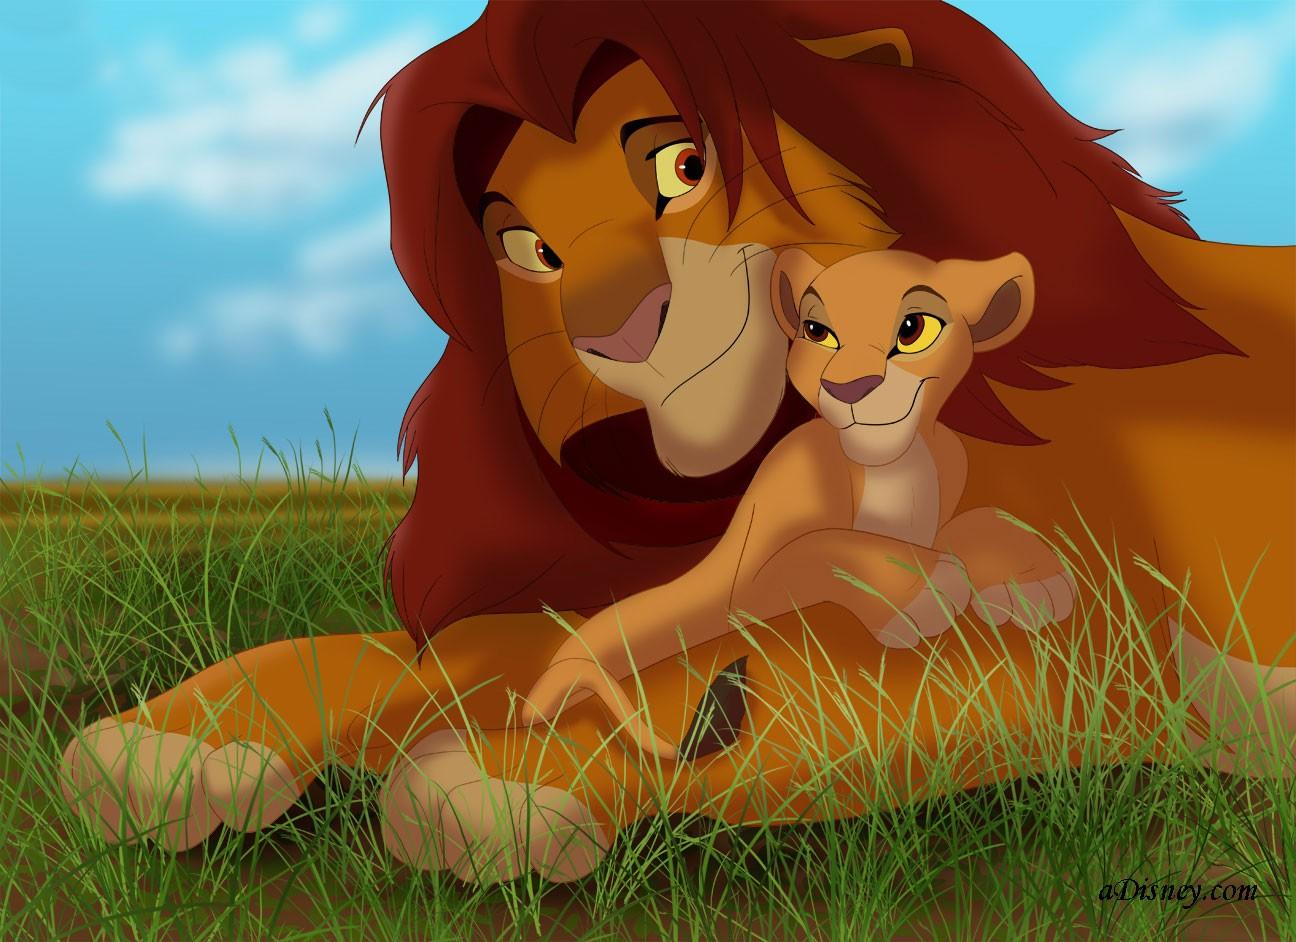 The Lion King 2 Simba S Pride HD Wallpaper Background Image HD